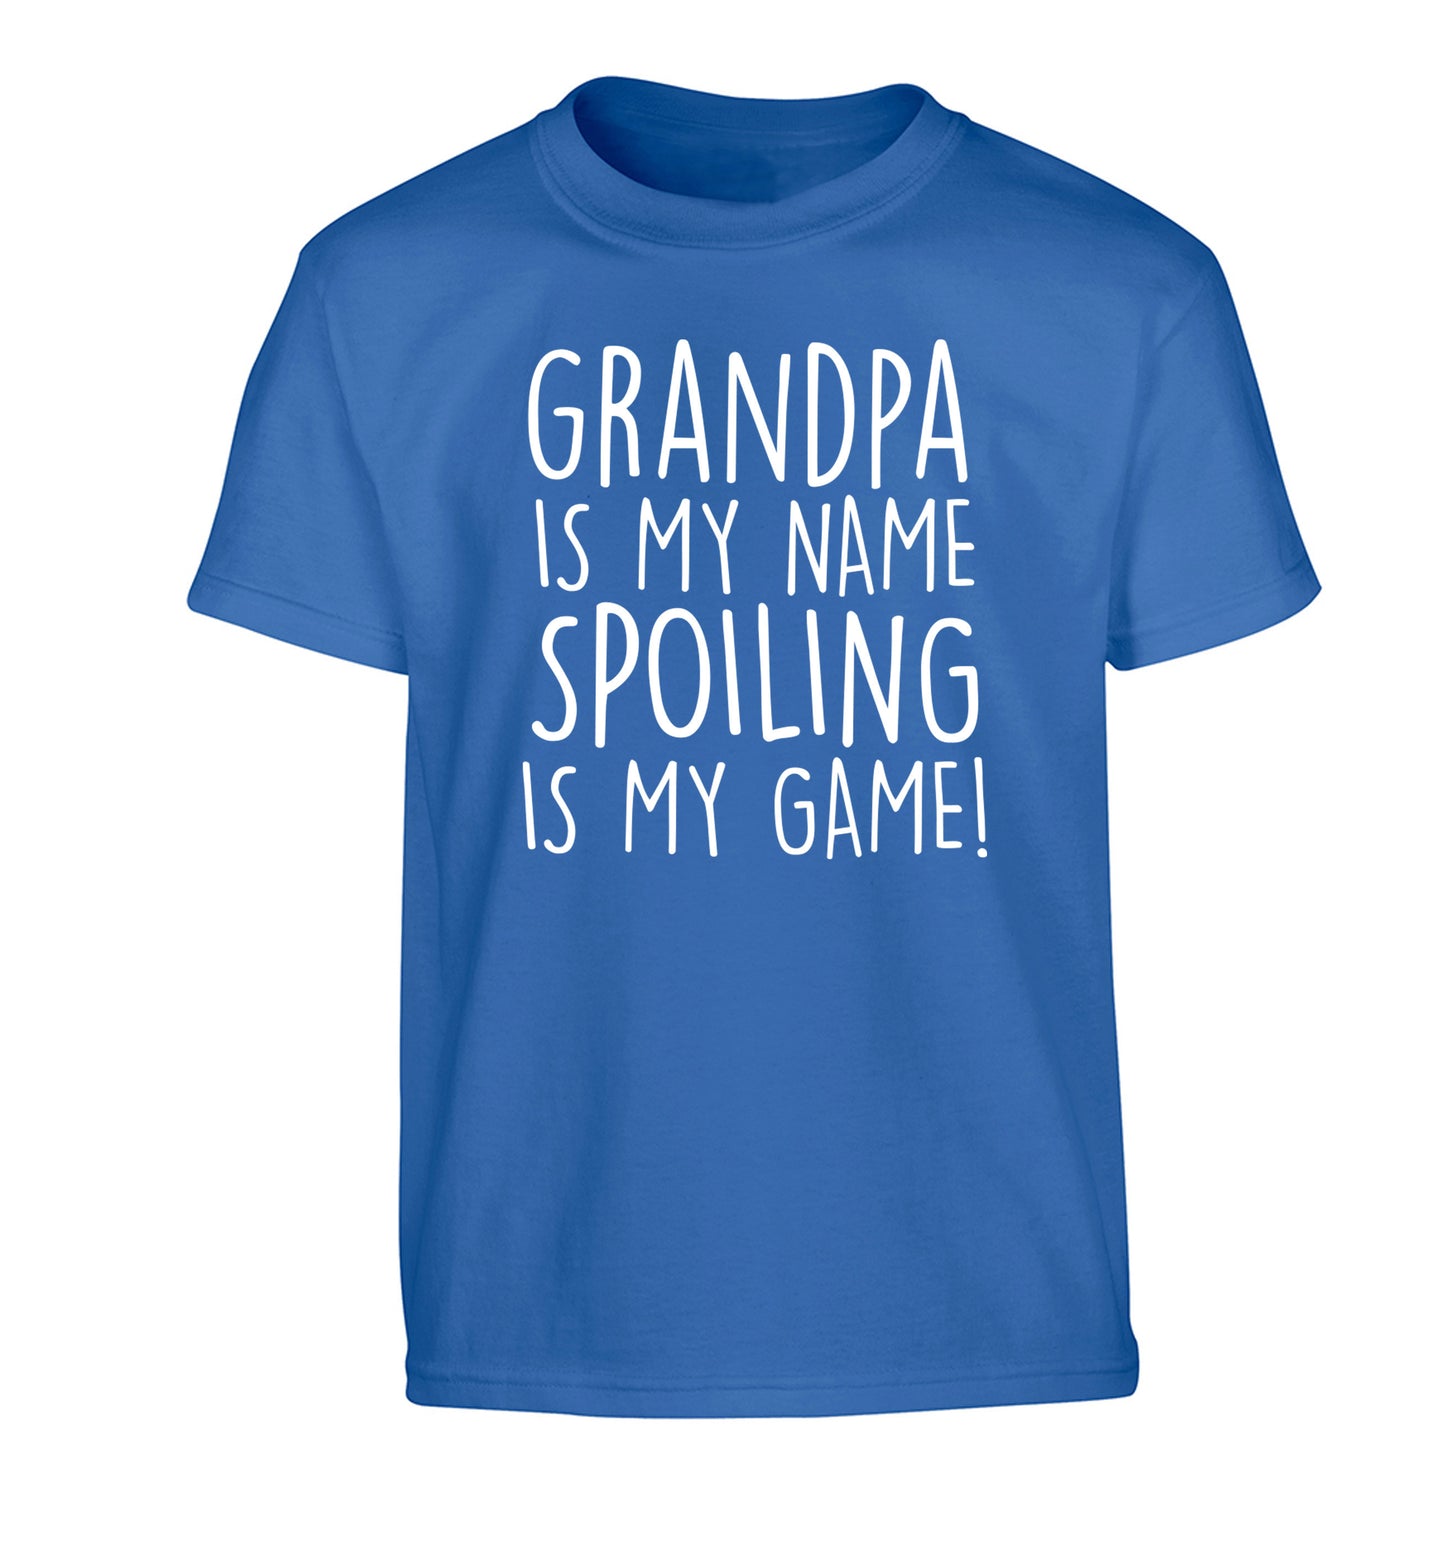 Grandpa is my name, spoiling is my game Children's blue Tshirt 12-14 Years